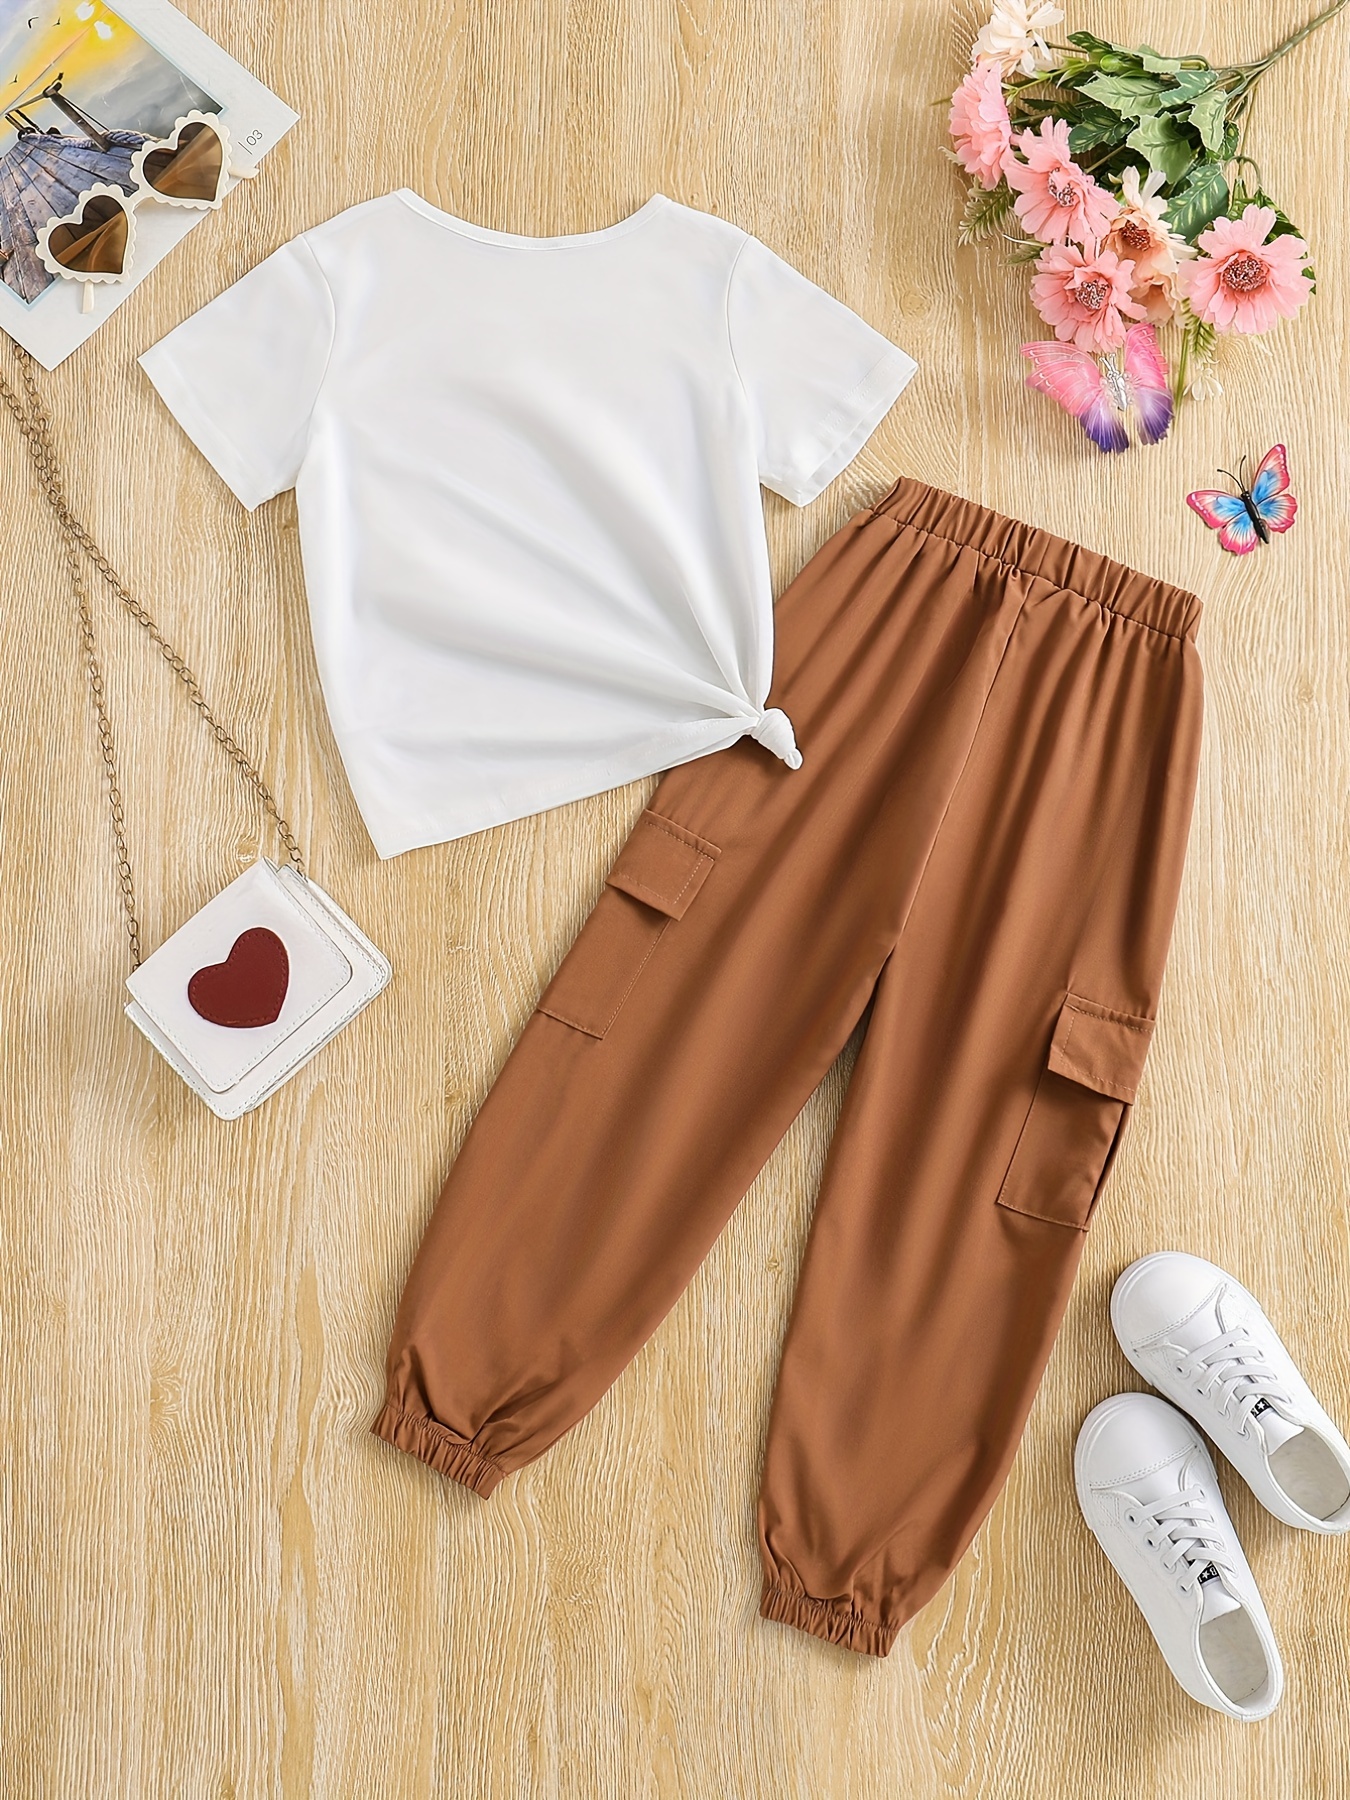  Cute Clothes For Teen Girls, Short Sleeve White Crop Tops  Tee Shirts + Pink Cargo Jogger Pants Outfits 2pcs Clothes Set9-10 Years Tag  150